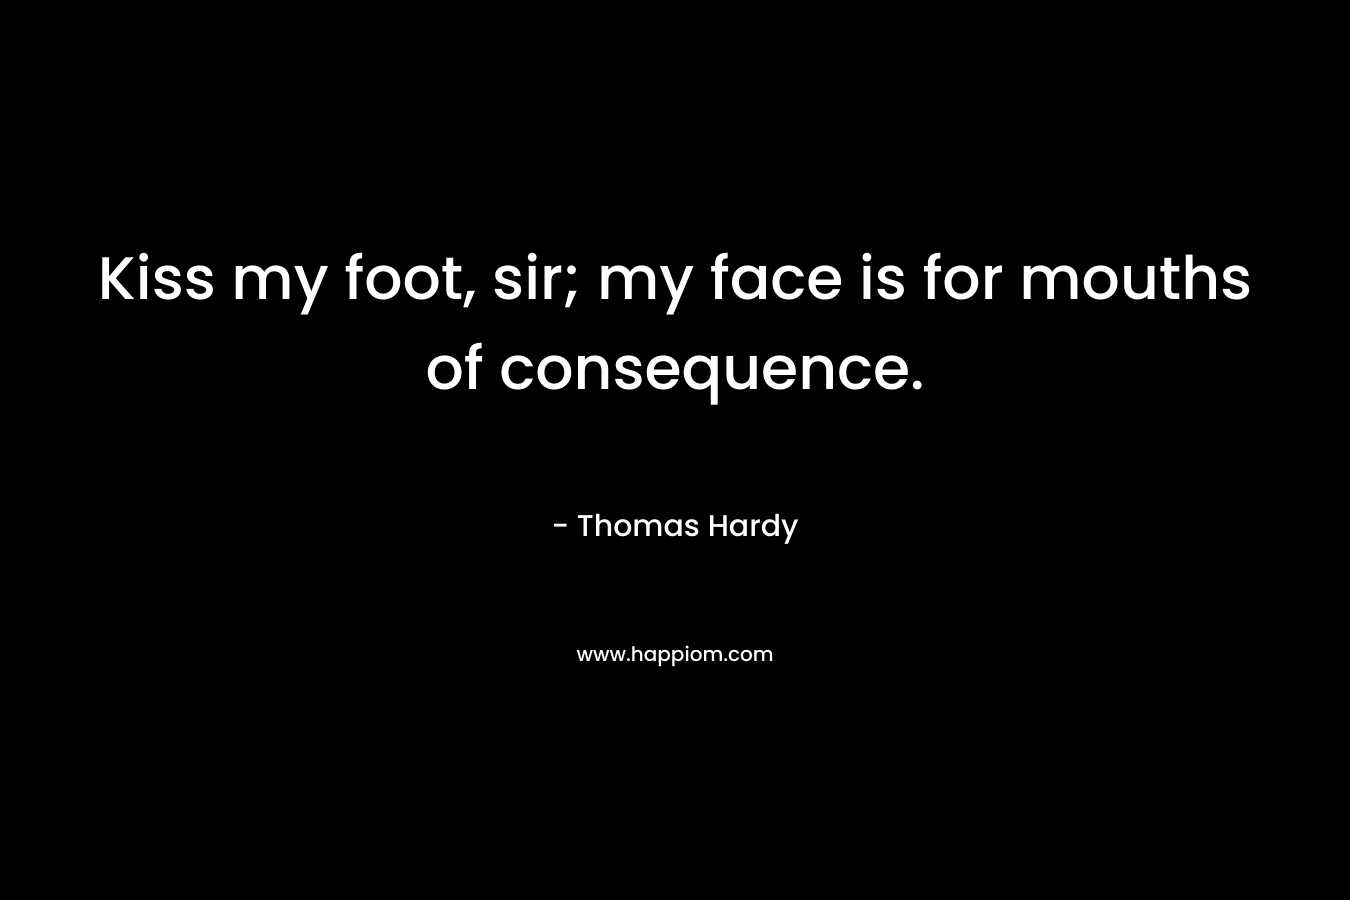 Kiss my foot, sir; my face is for mouths of consequence.